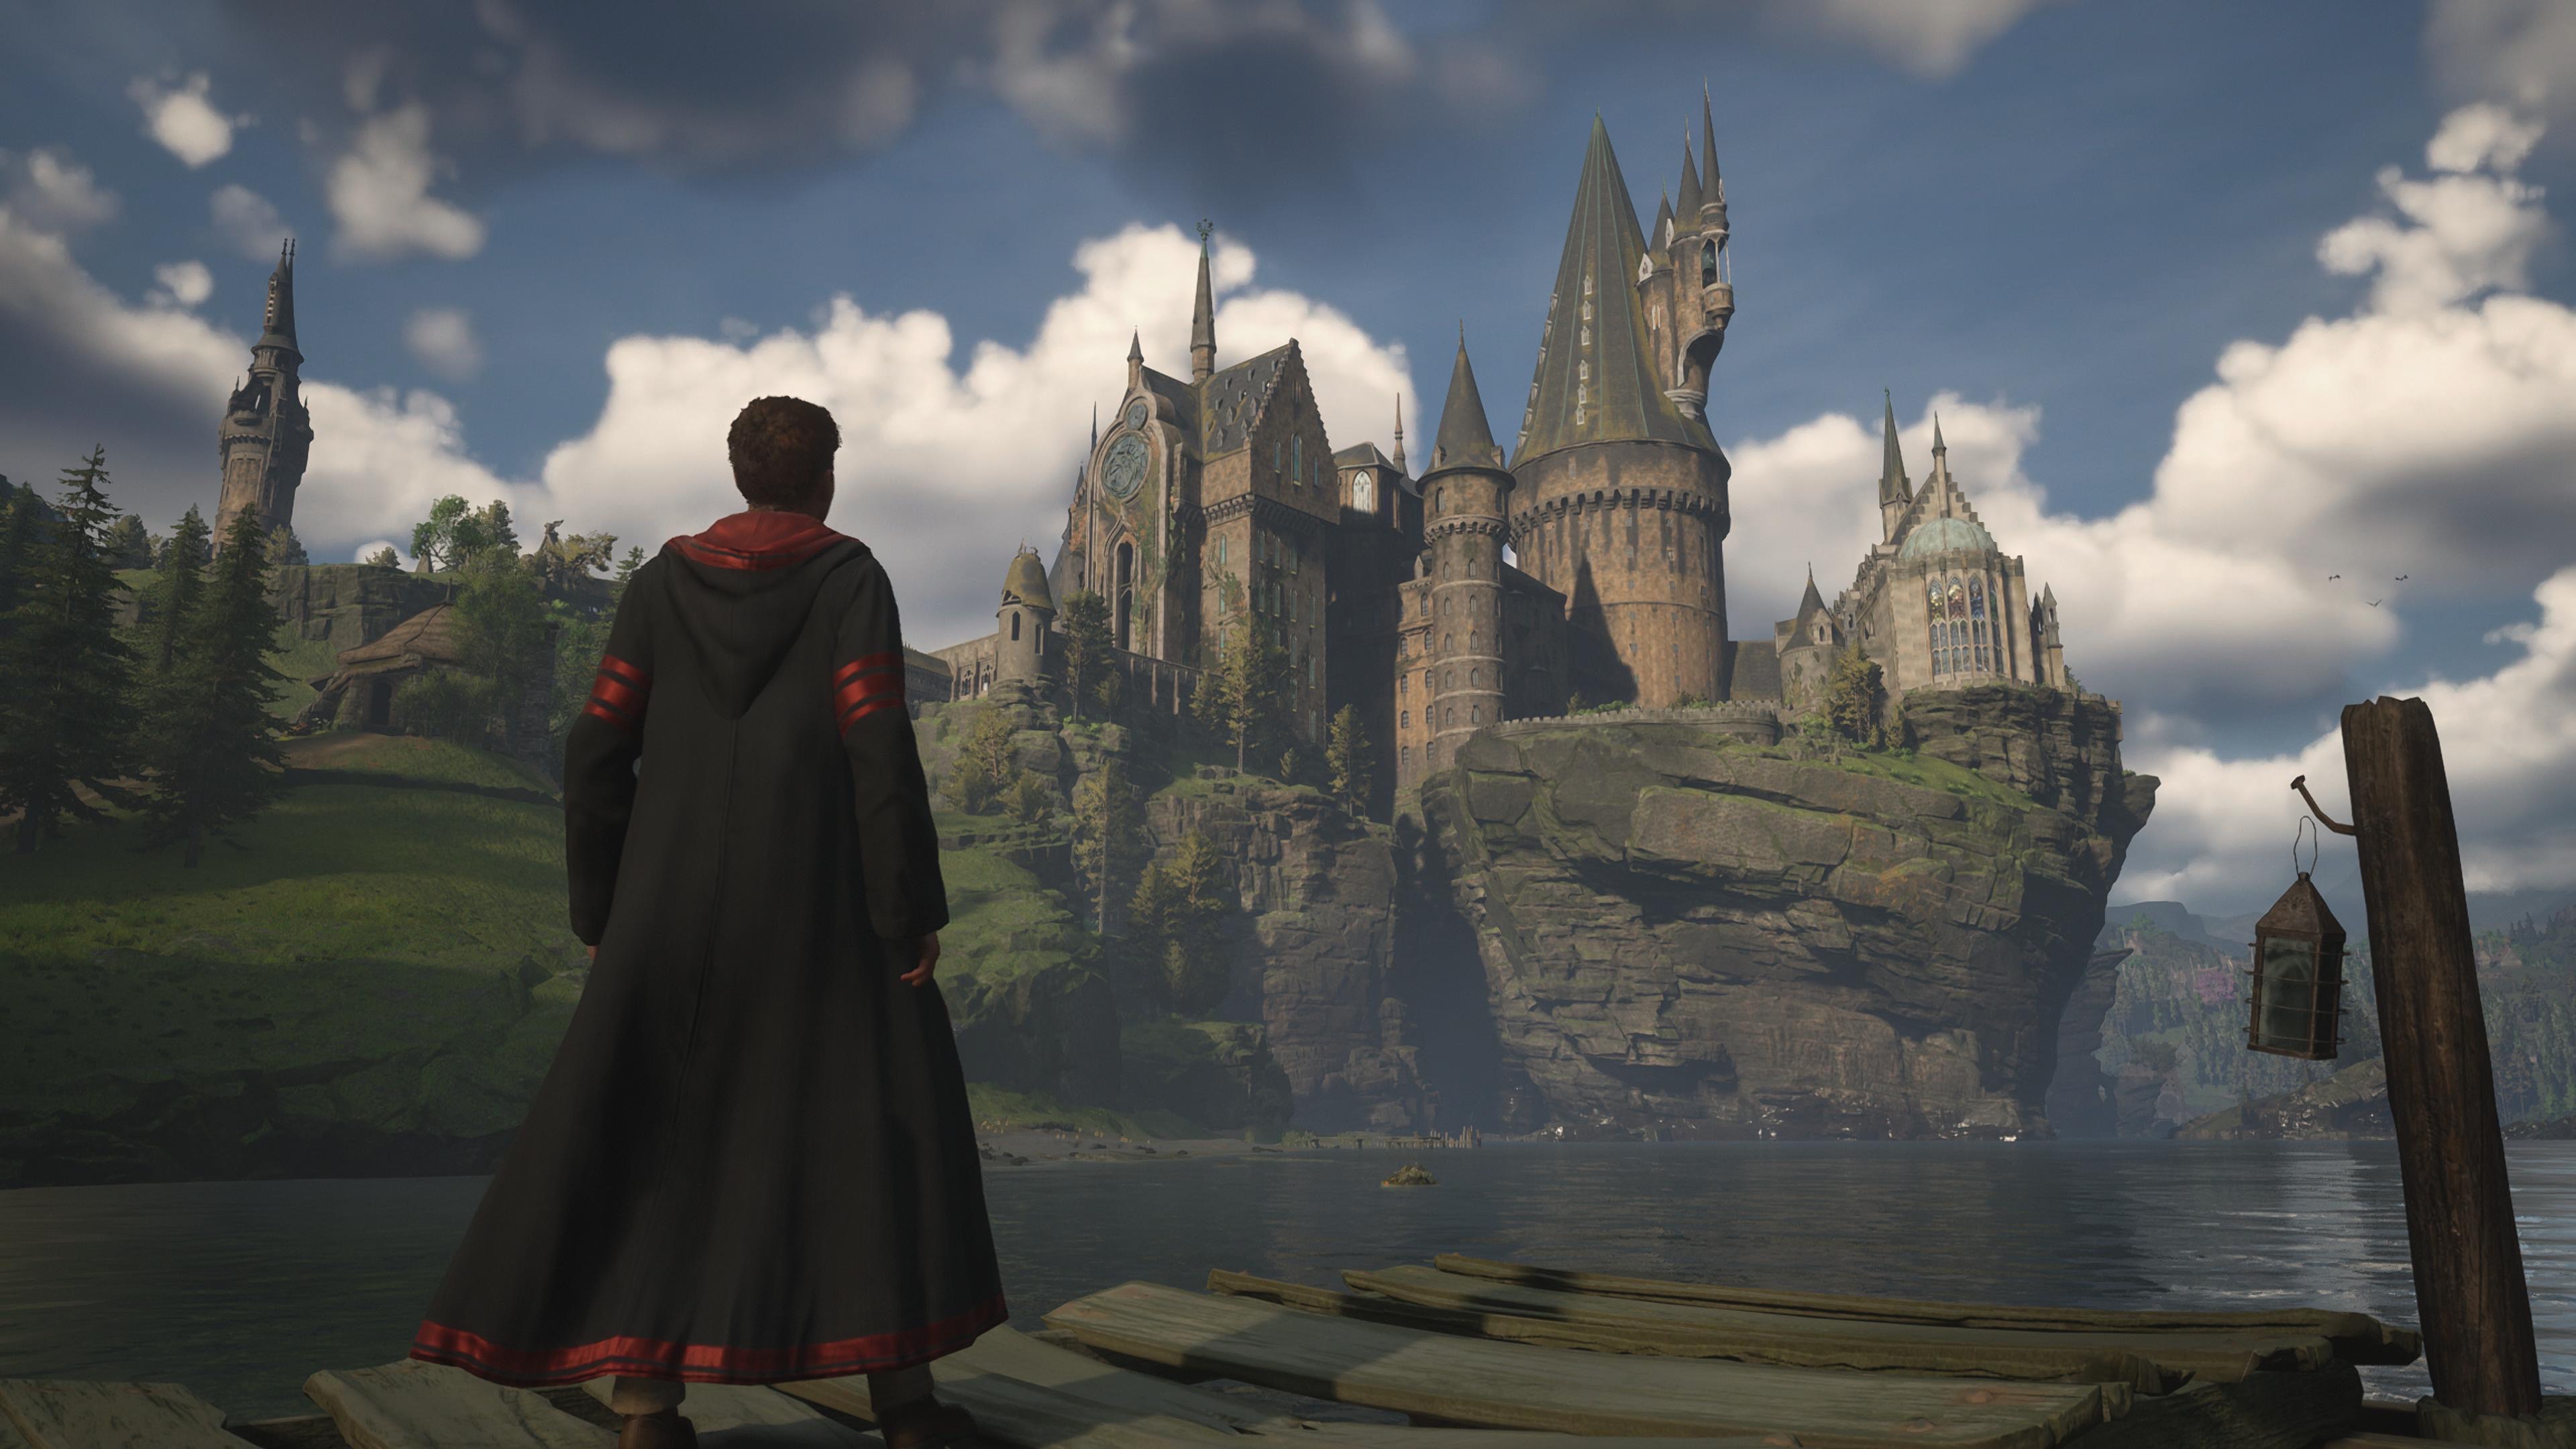 Hogwarts Legacy review: Tries to do too much all at once